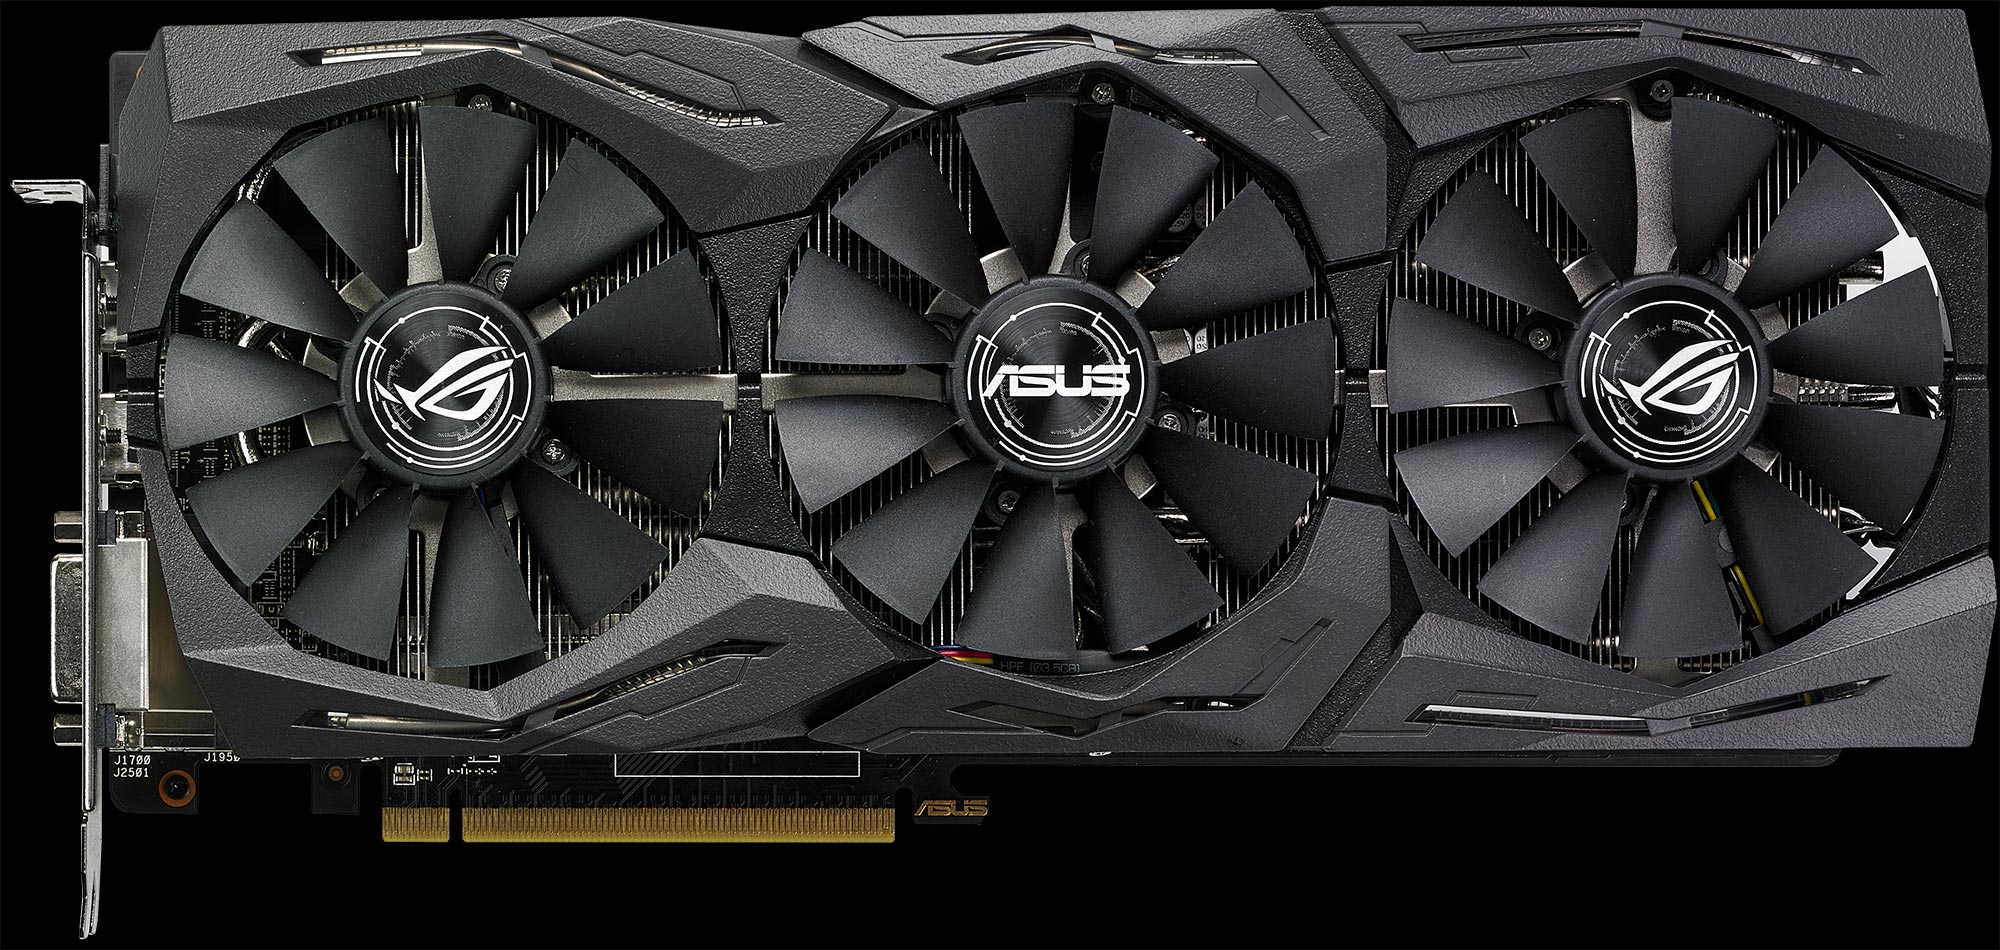 Introducing the ROG Strix Radeon RX 580 and 570 graphics cards